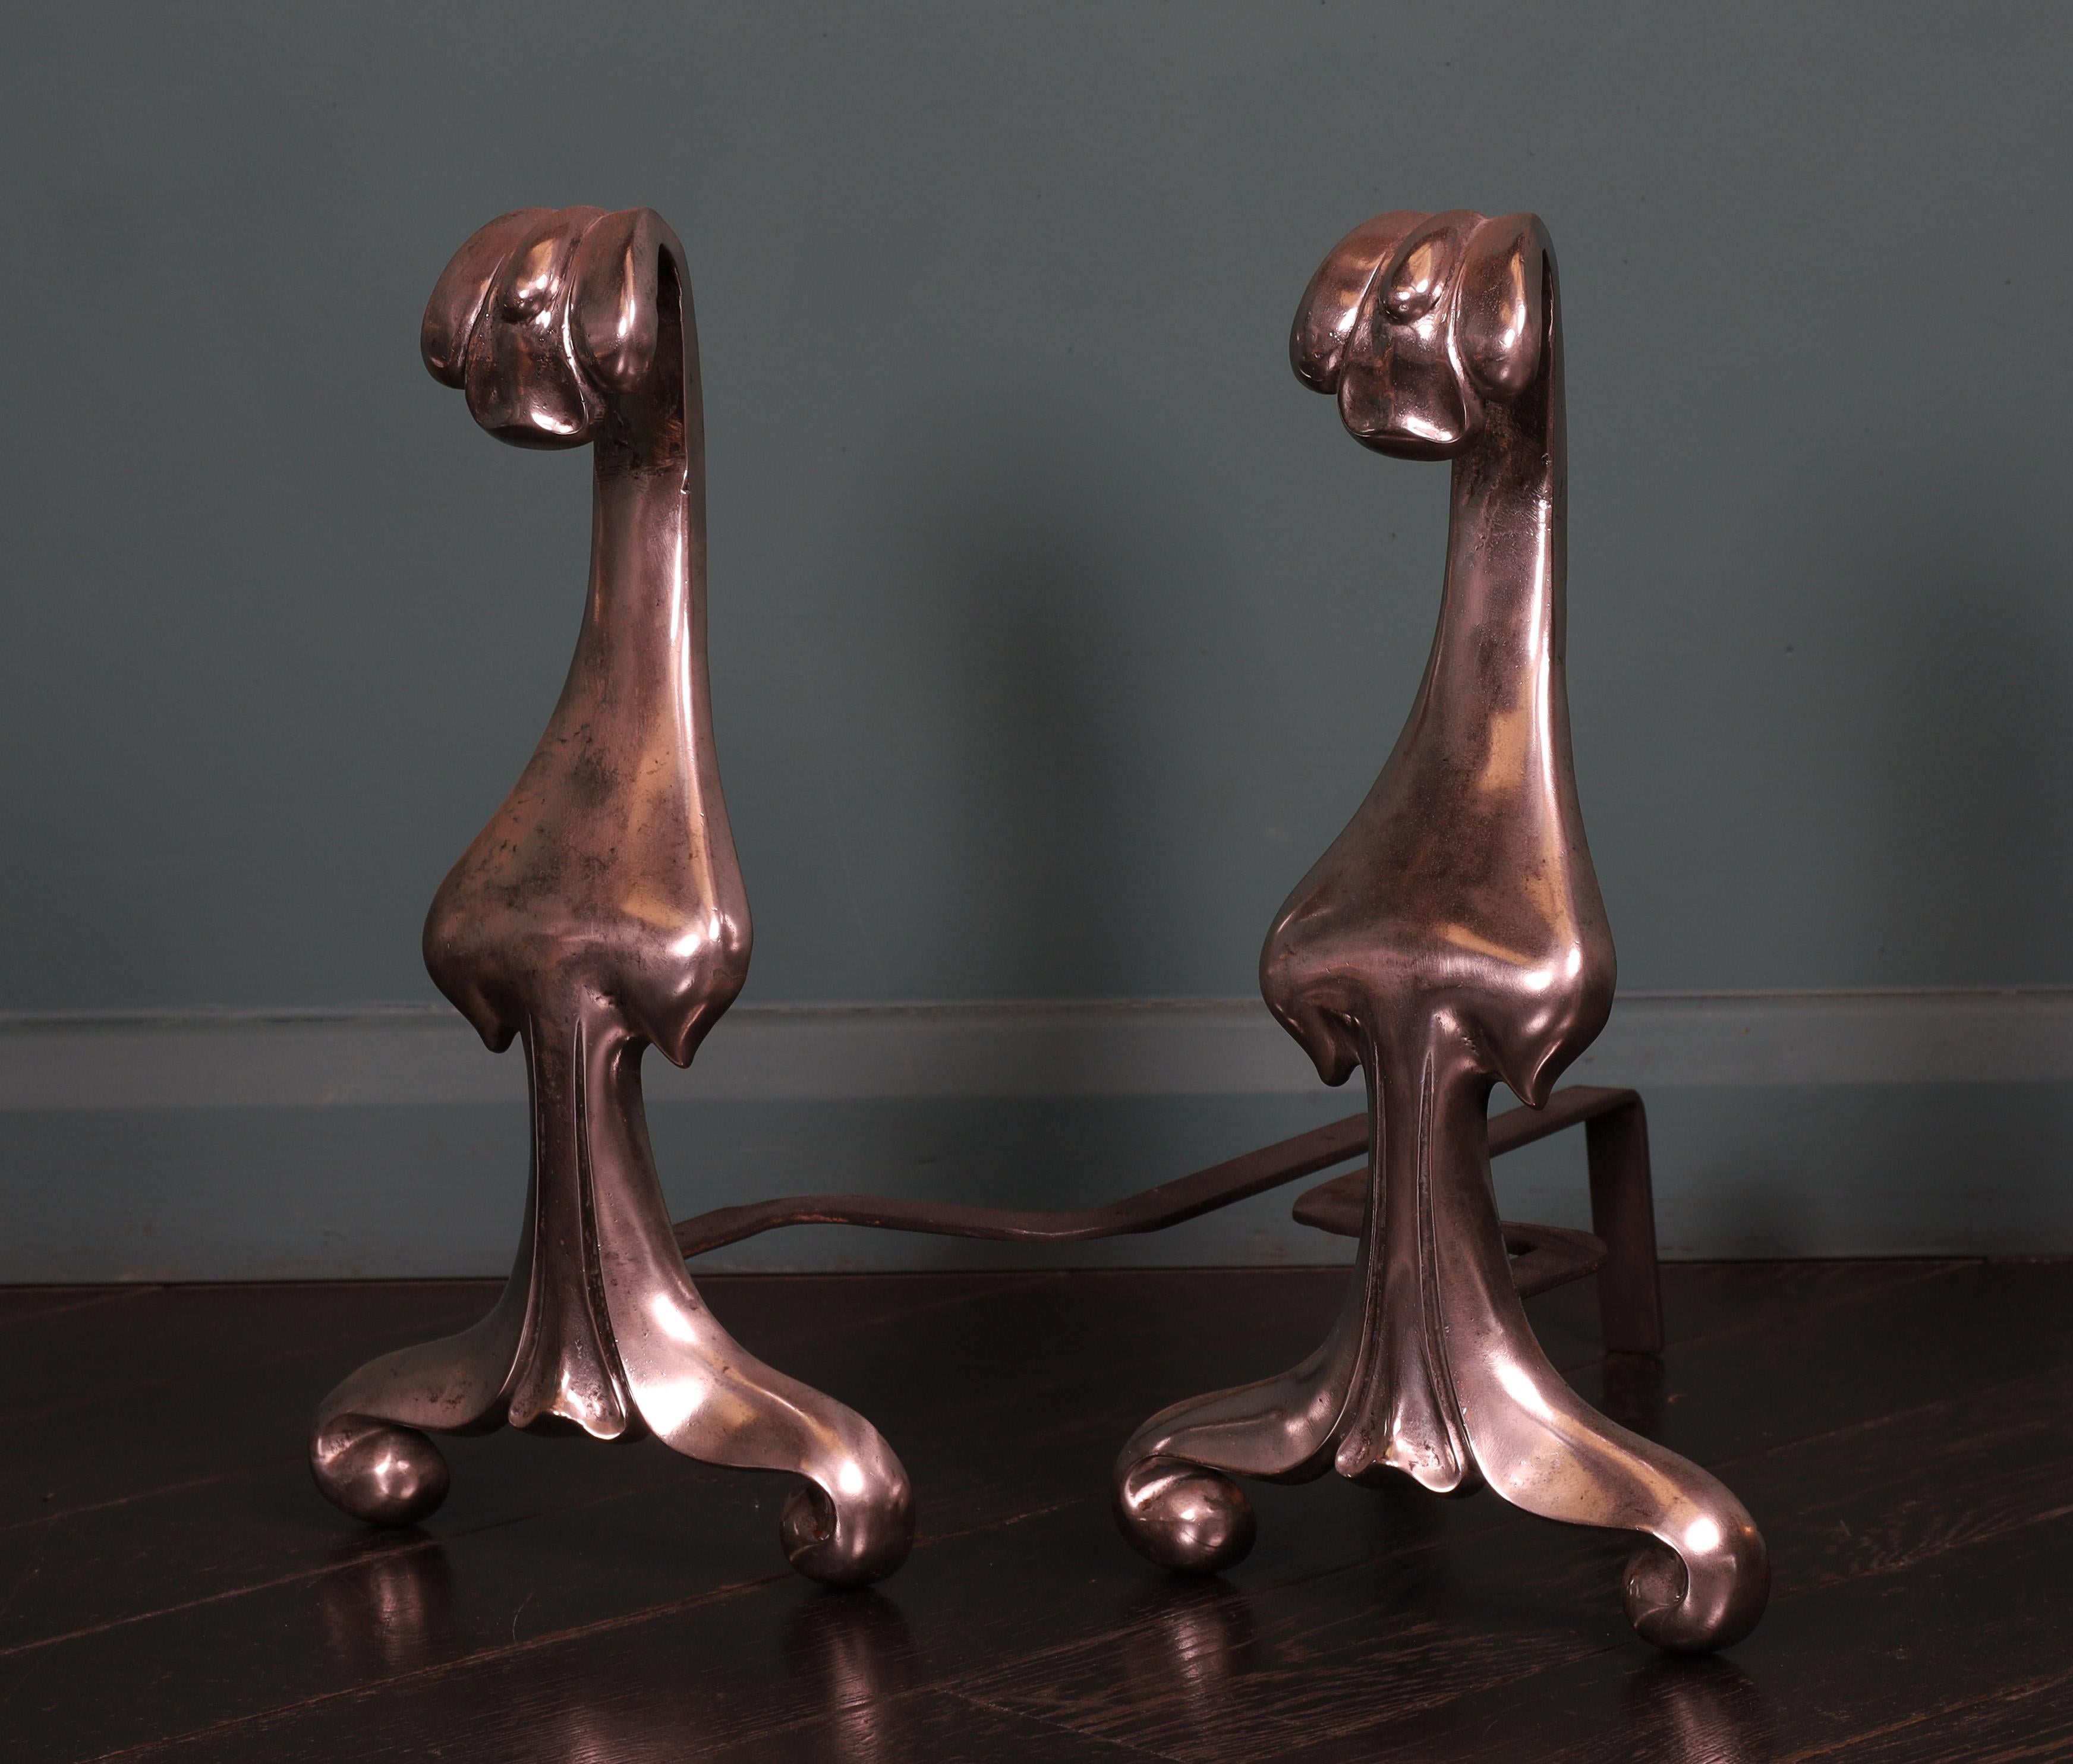 A pair of stylish Art Nouveau polished steel fire dogs with curved forward-facing petals uppermost, supported on scrolled feet. Restored.
Circa early twentieth century